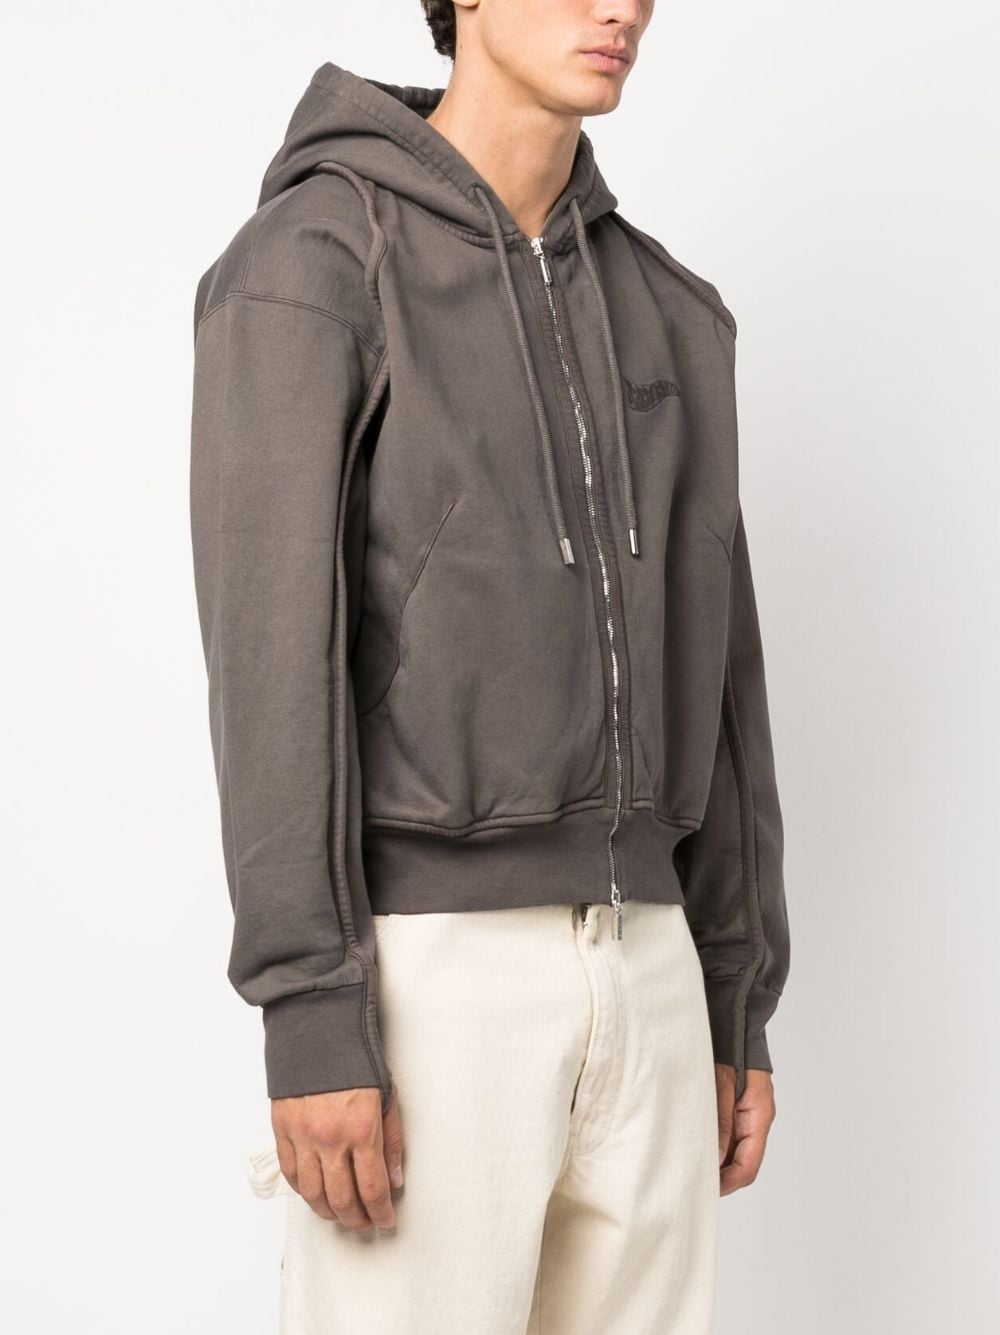 Jacquemus Clay Organic Cotton Hooded Jacket - Farfetch